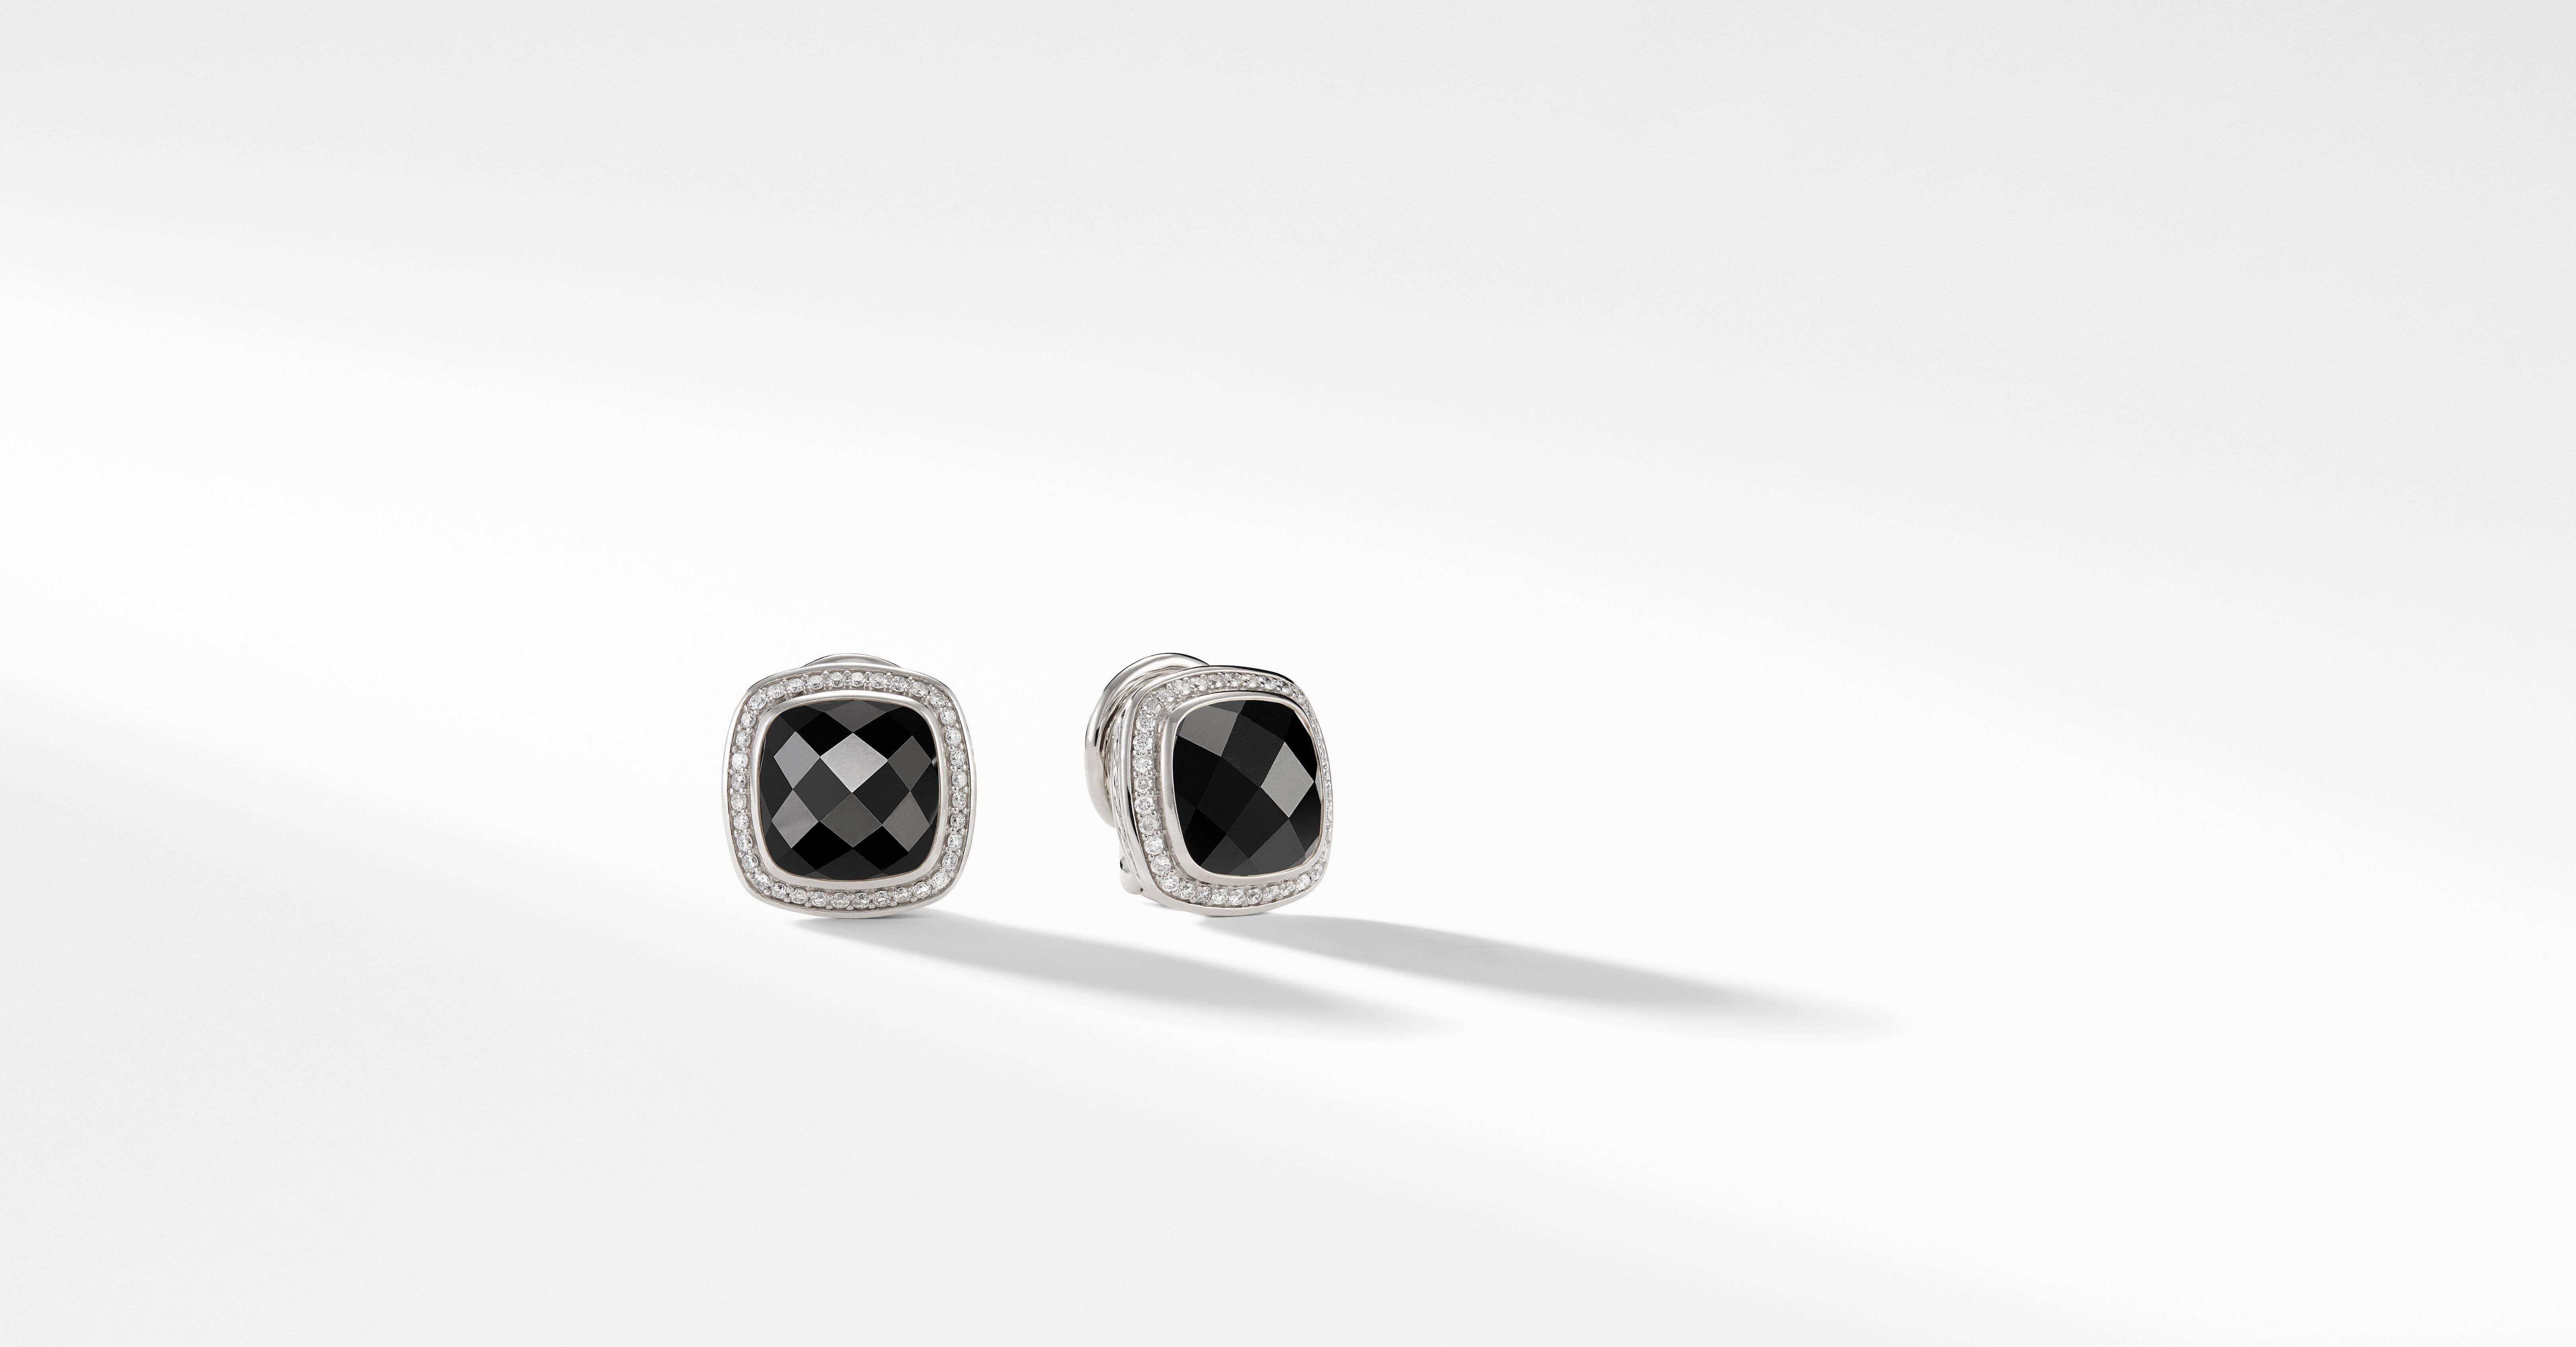 Albion® Stud Earrings in Sterling Silver with Black Onyx and Pavé